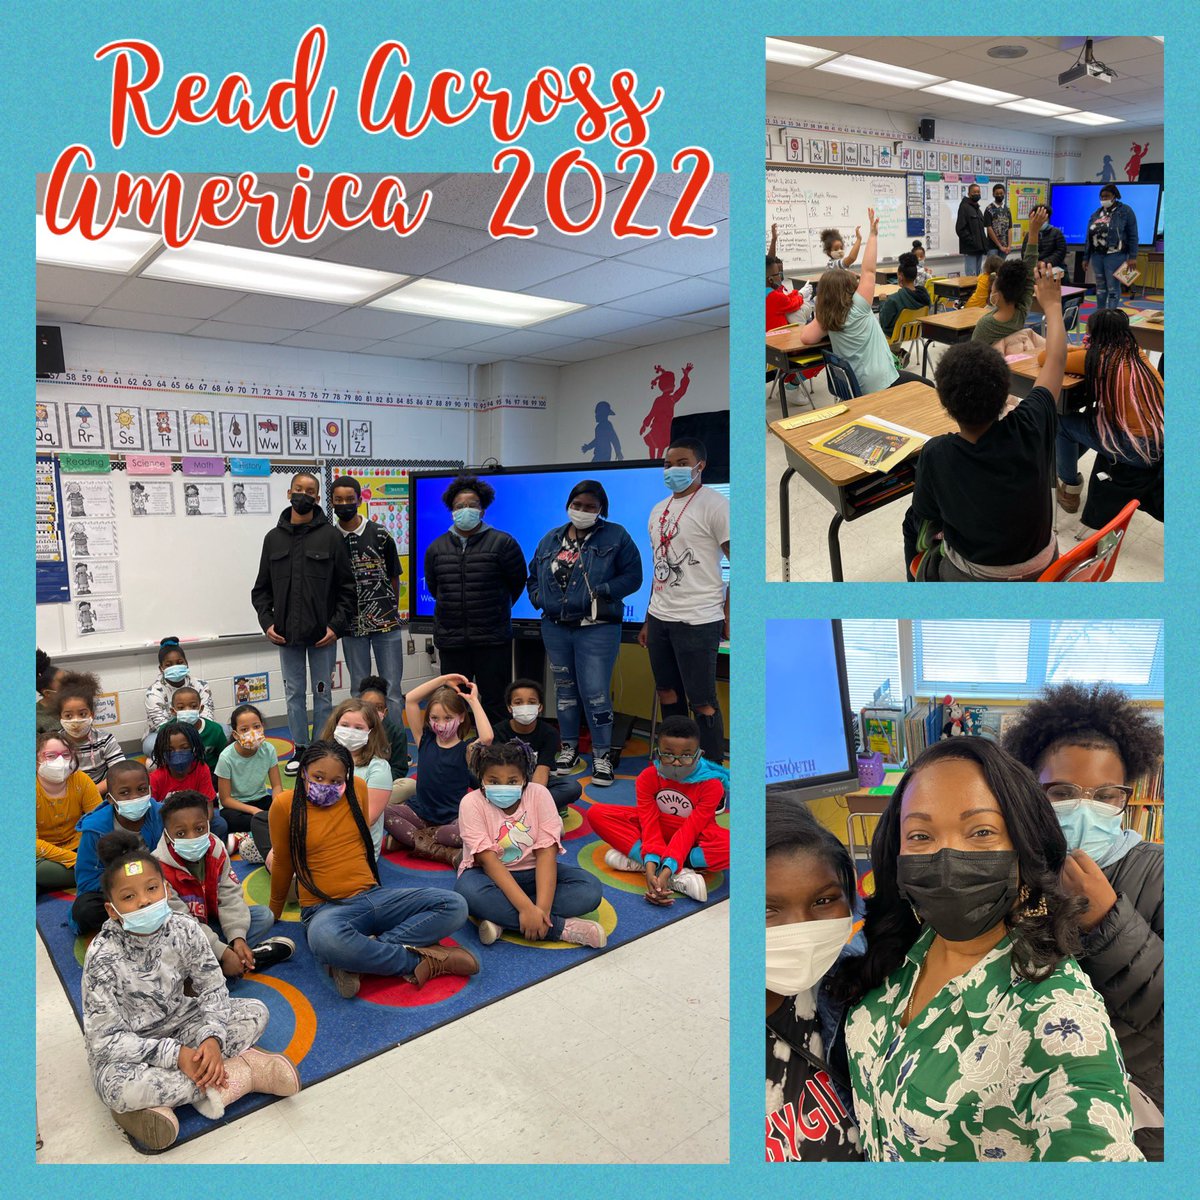 Read Across America Day was a huge success in 2nd grade @CAES_Patriots!!A huge thank you to the National Junior Honor Society students who came over to read from @ChMSTruckers and the Class of 2022 valedictorian (former CAES student) from @GoCHSTruckers. #PPSShines